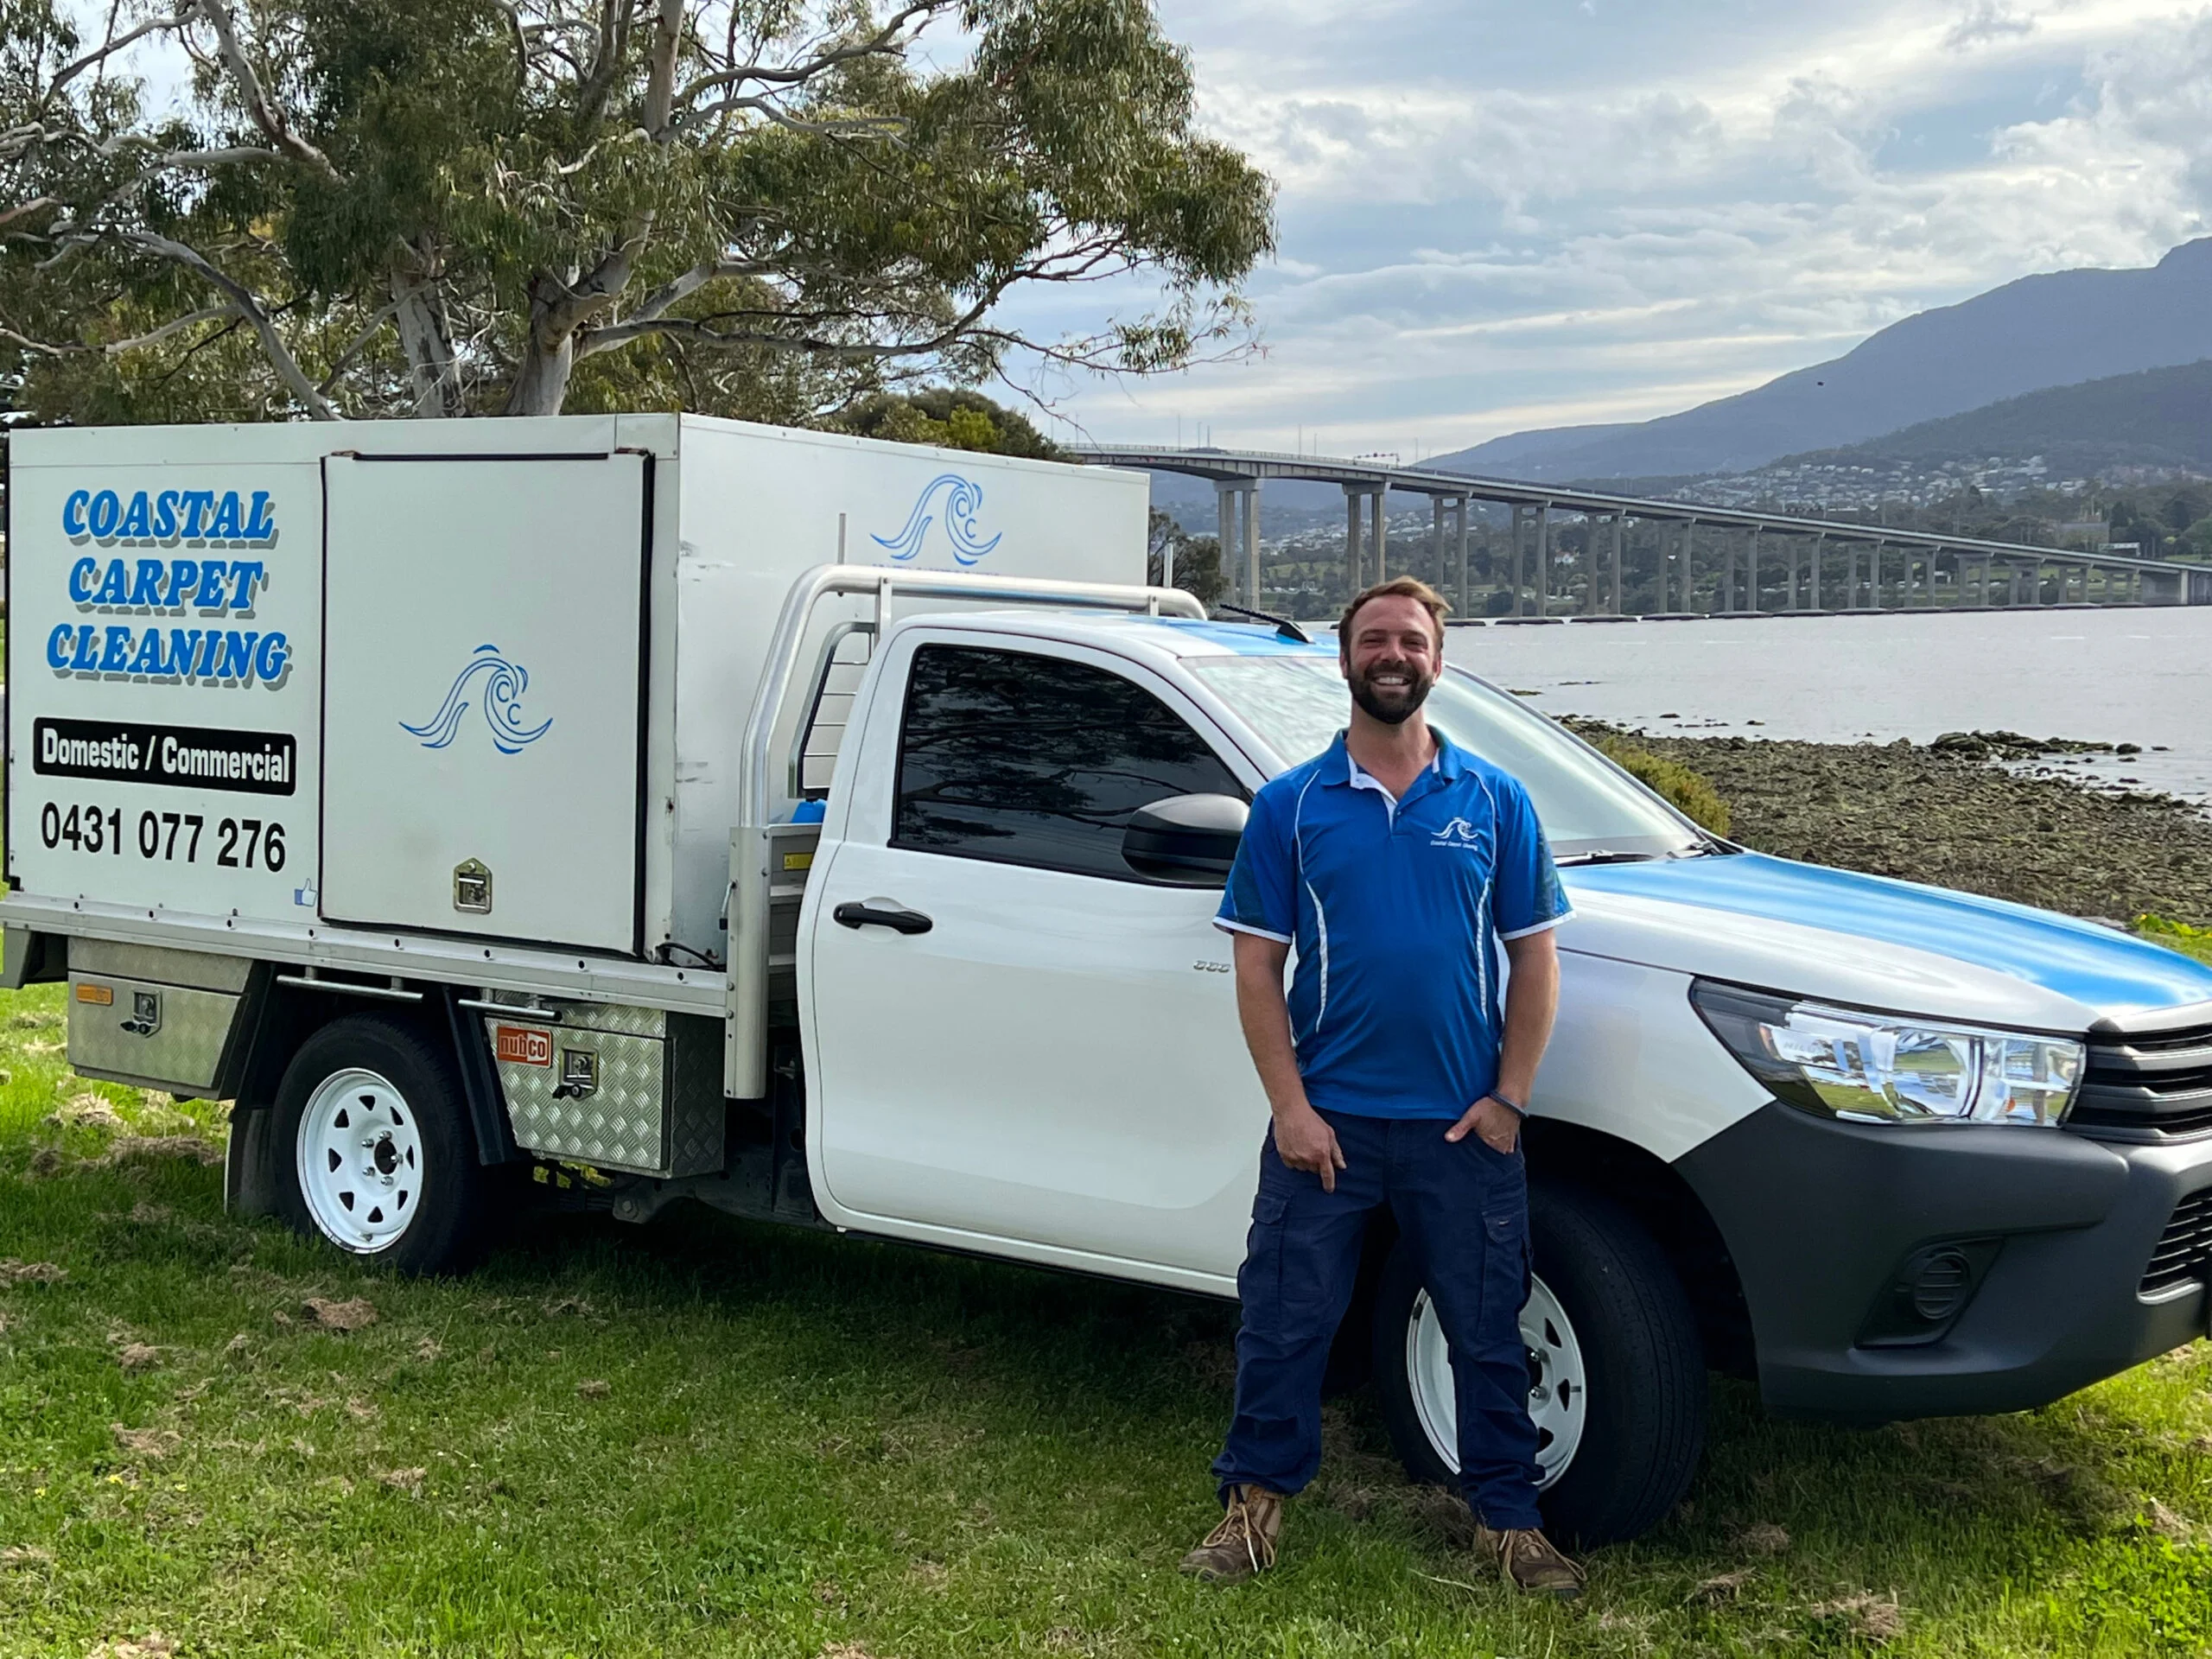 Simon standing in front of Carpet Cleaning vehicle in Hobart